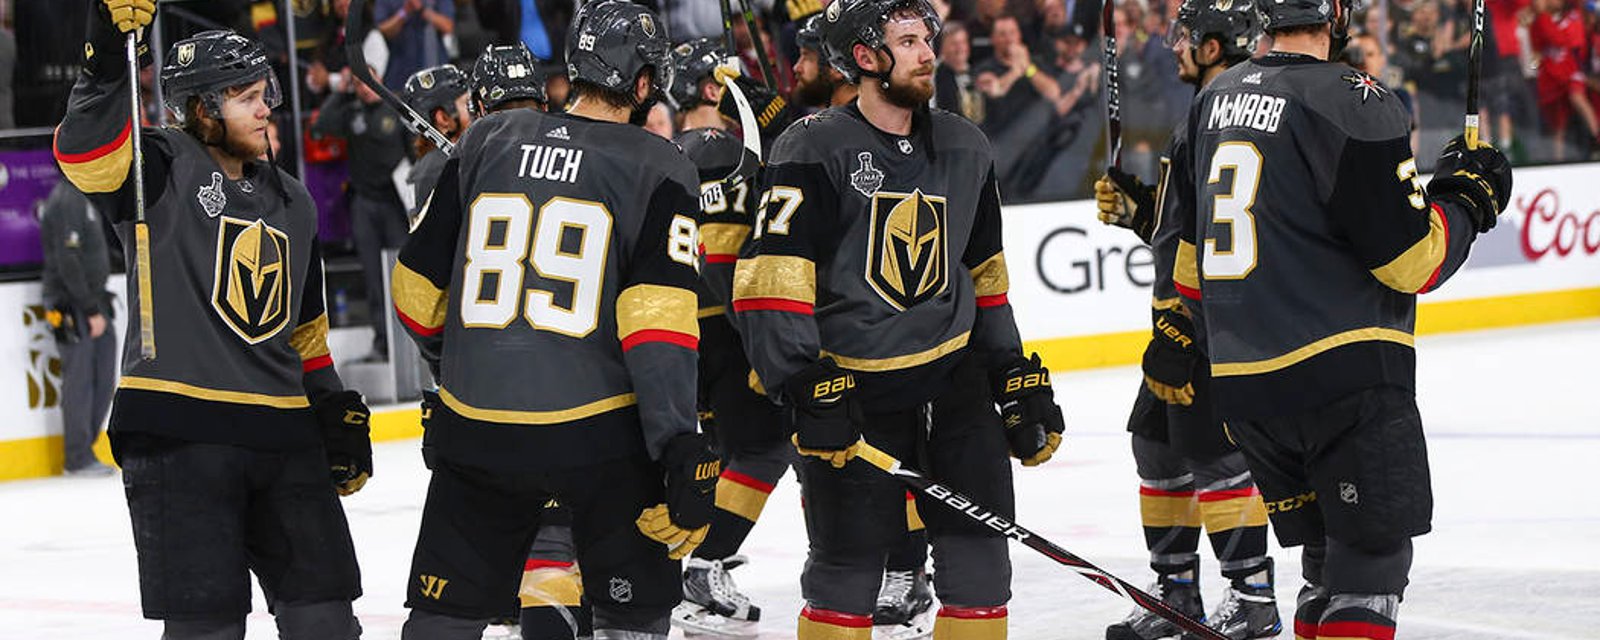 Karma comes back to haunt the Golden Knights!